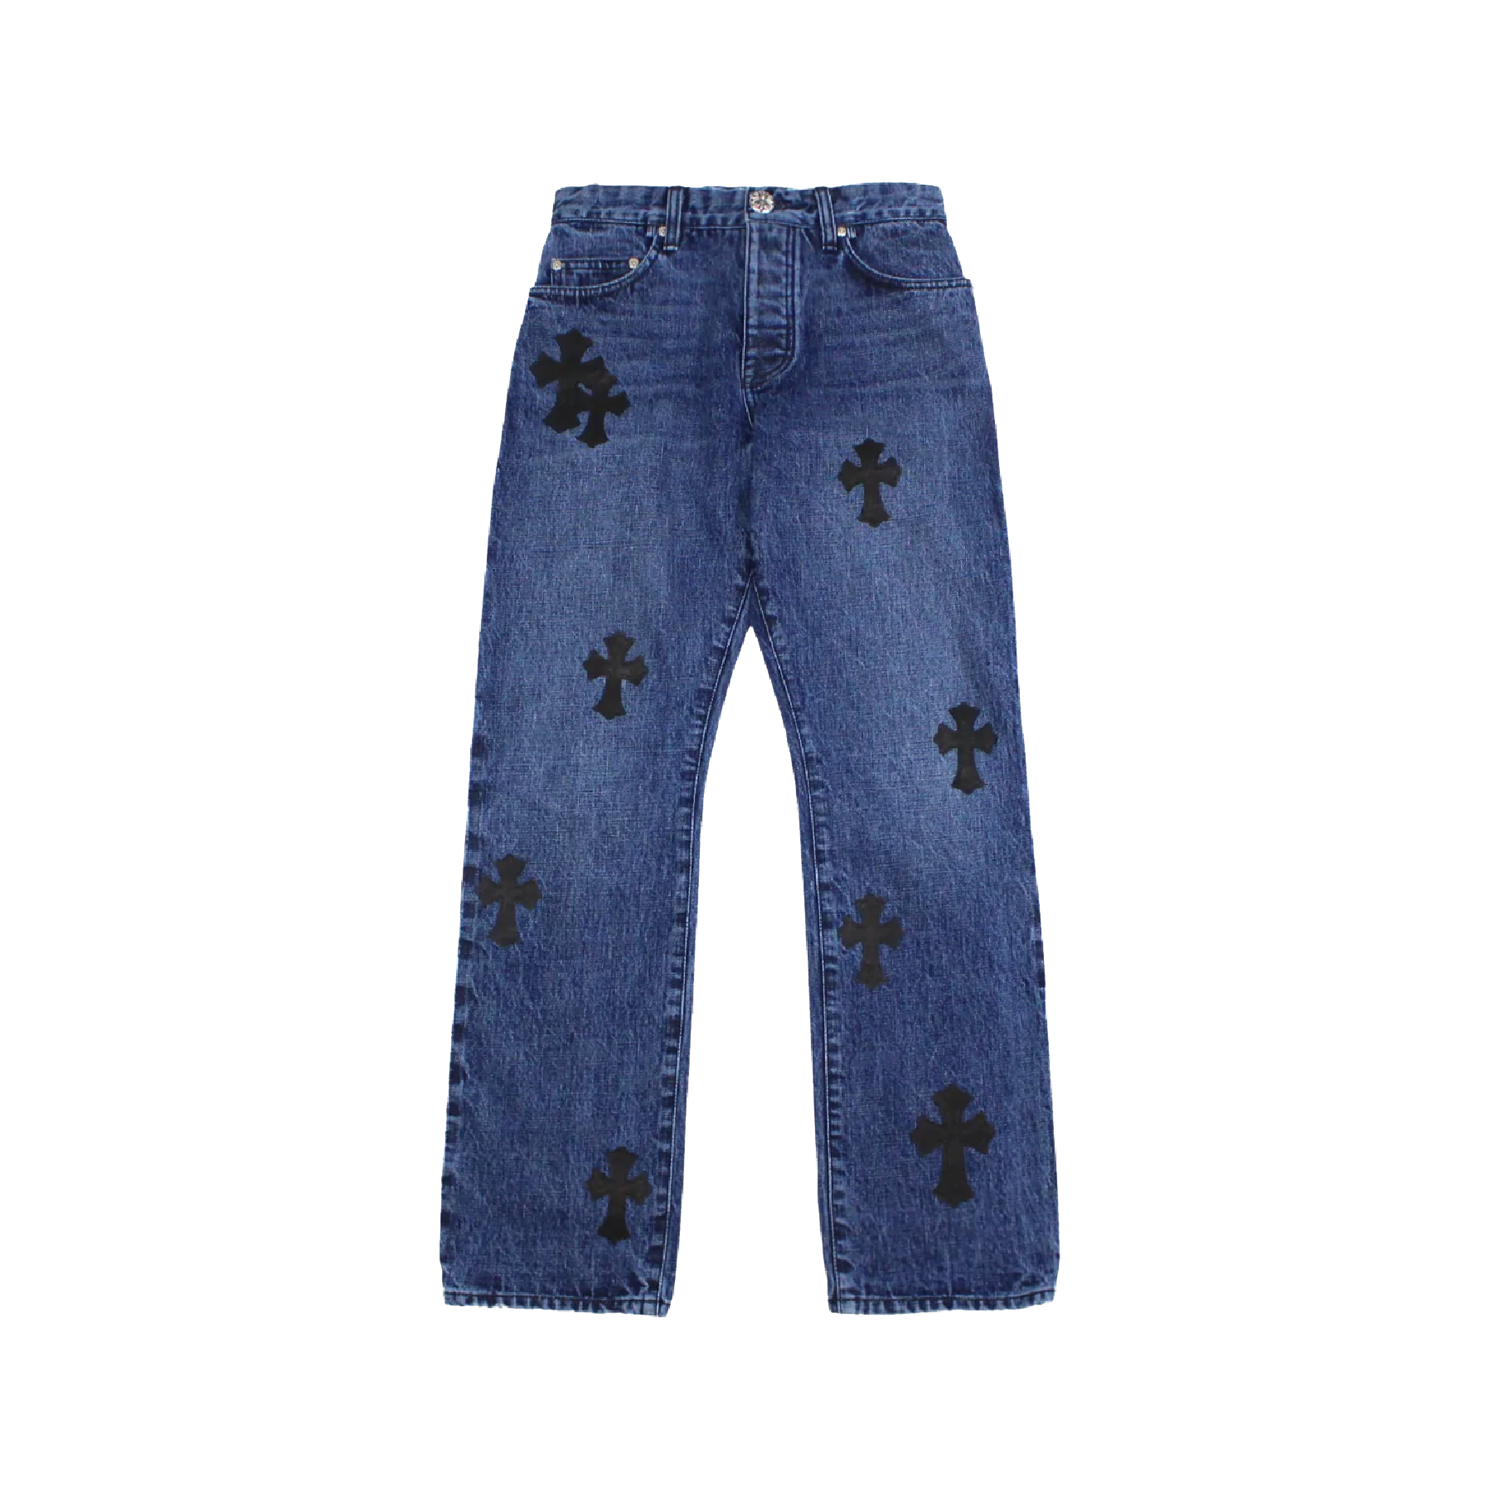 Cross Leather Patches Jeans, Official Website